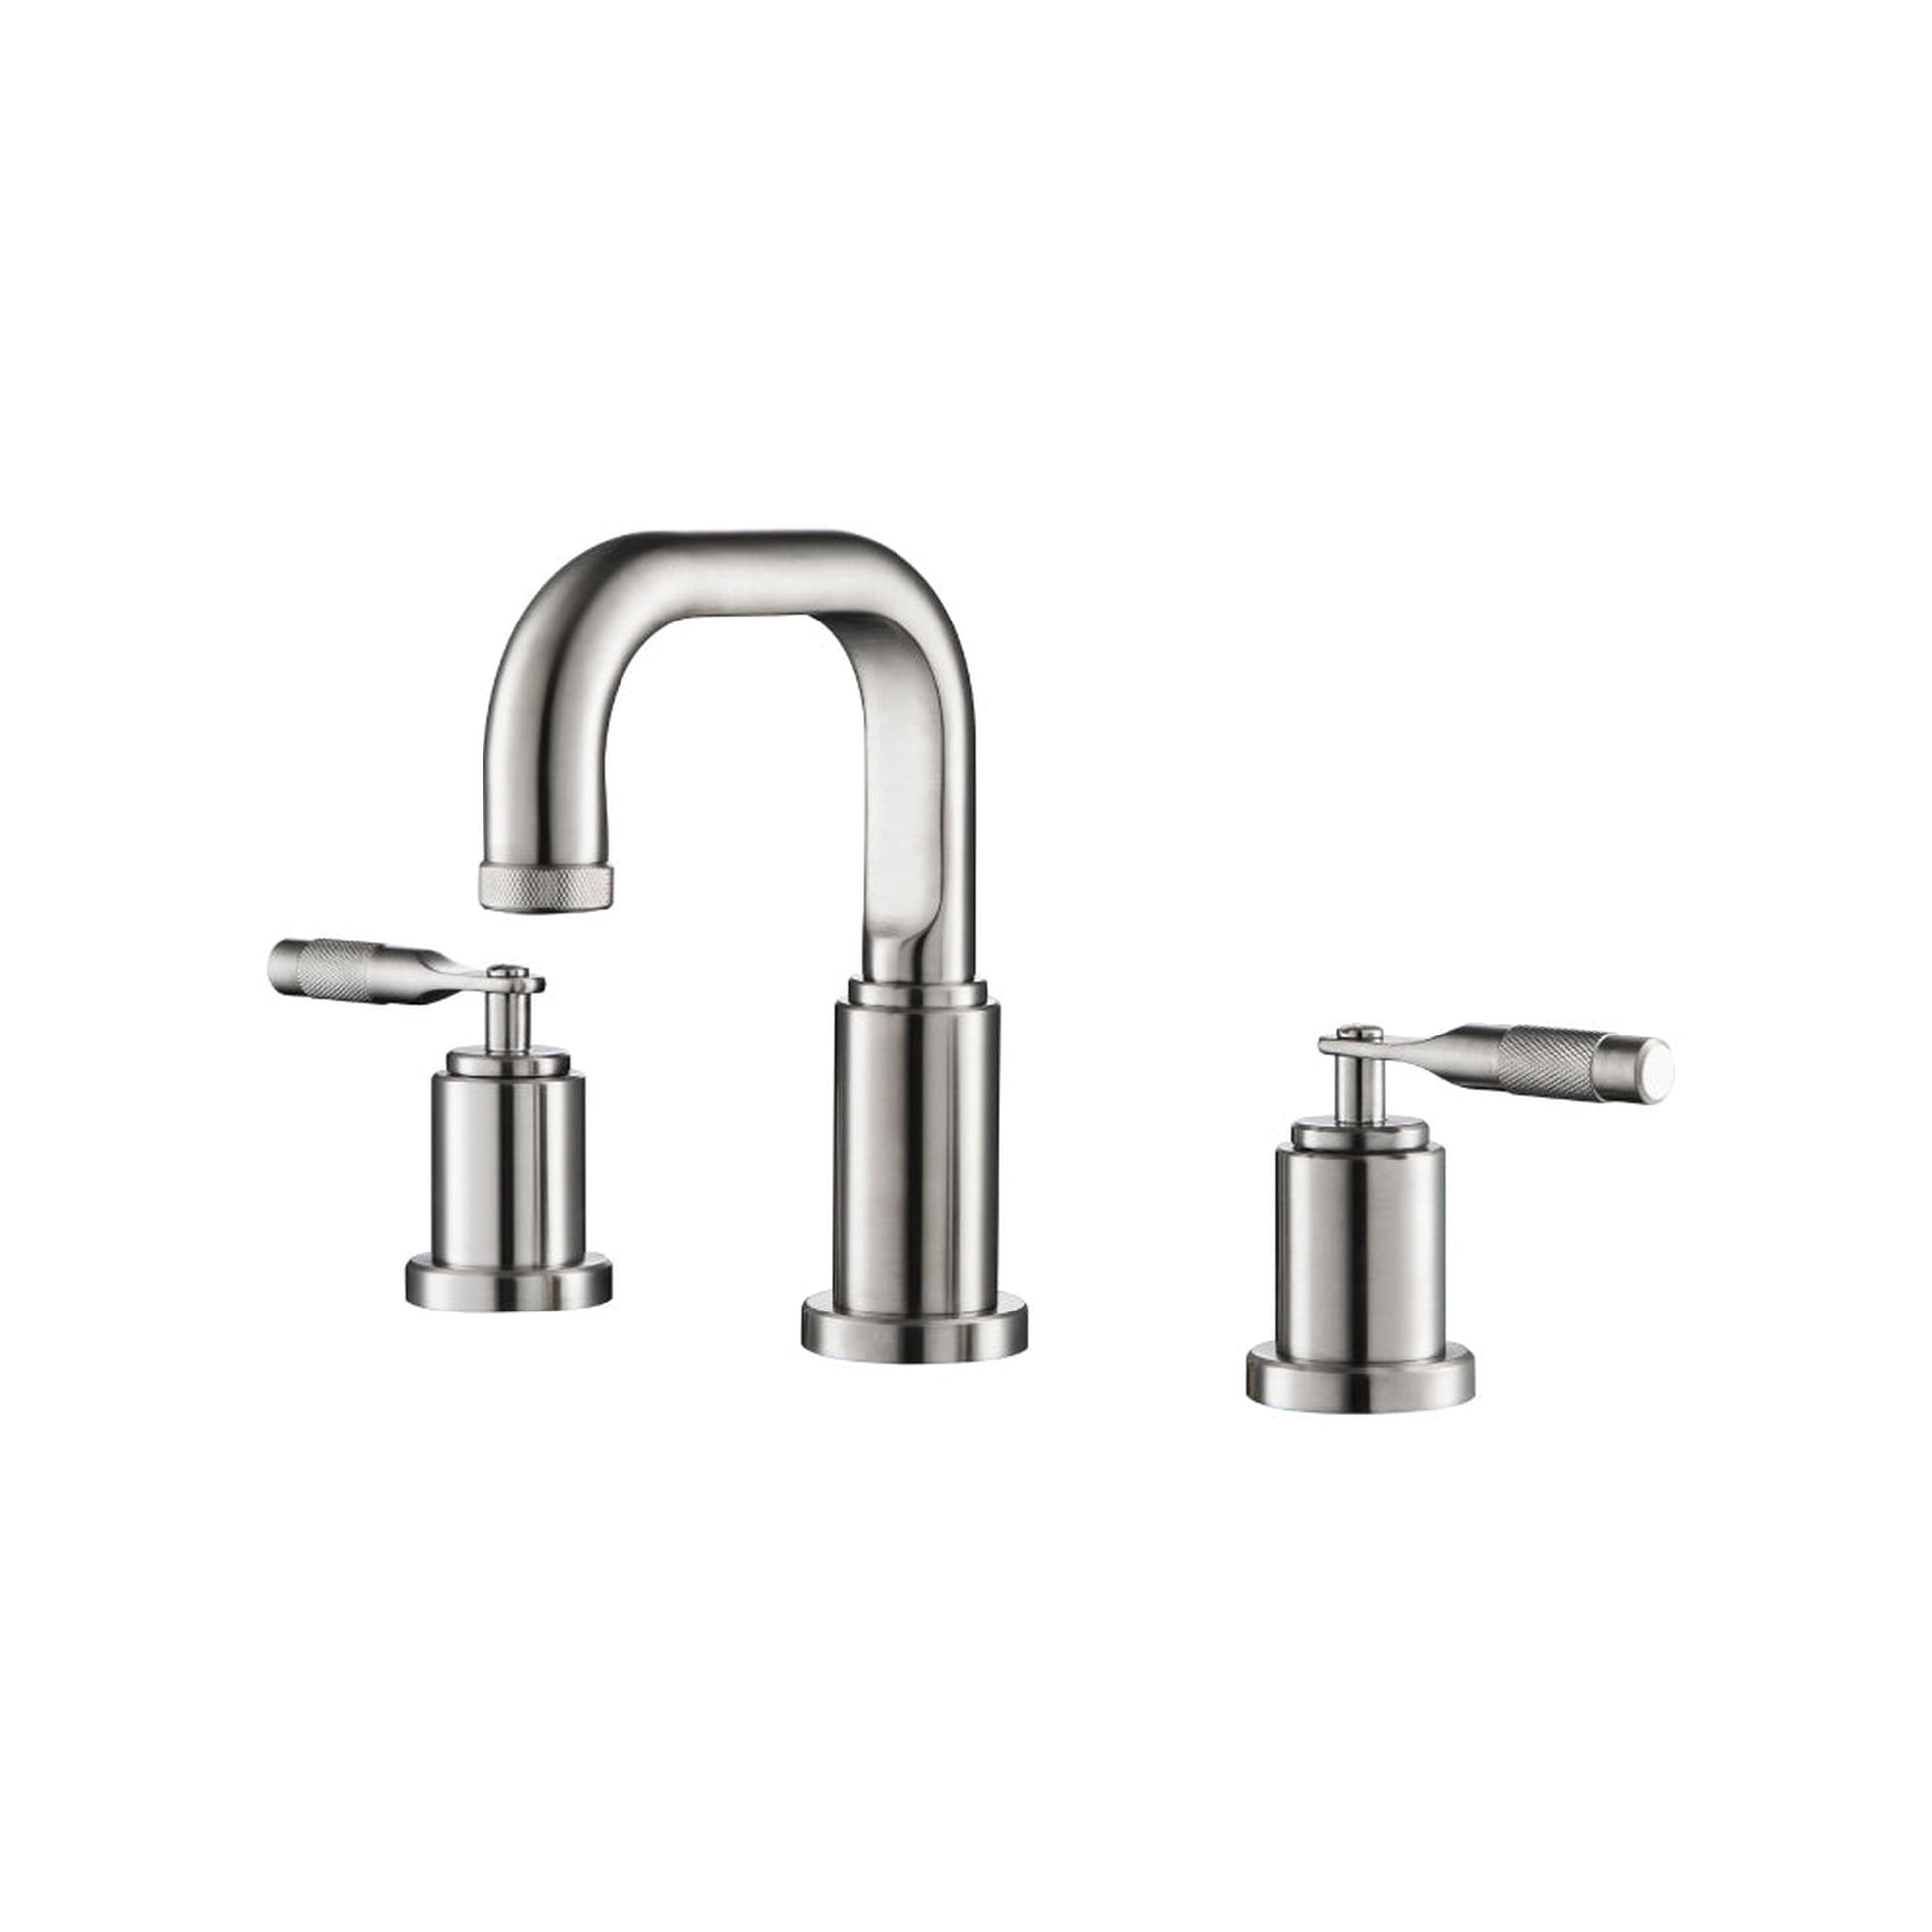 Isenberg Serie 250 14" Three-Hole Chrome Solid Brass Deck-Mounted Widespread Bathroom Sink Faucet With Overflow Pop-Up Drain